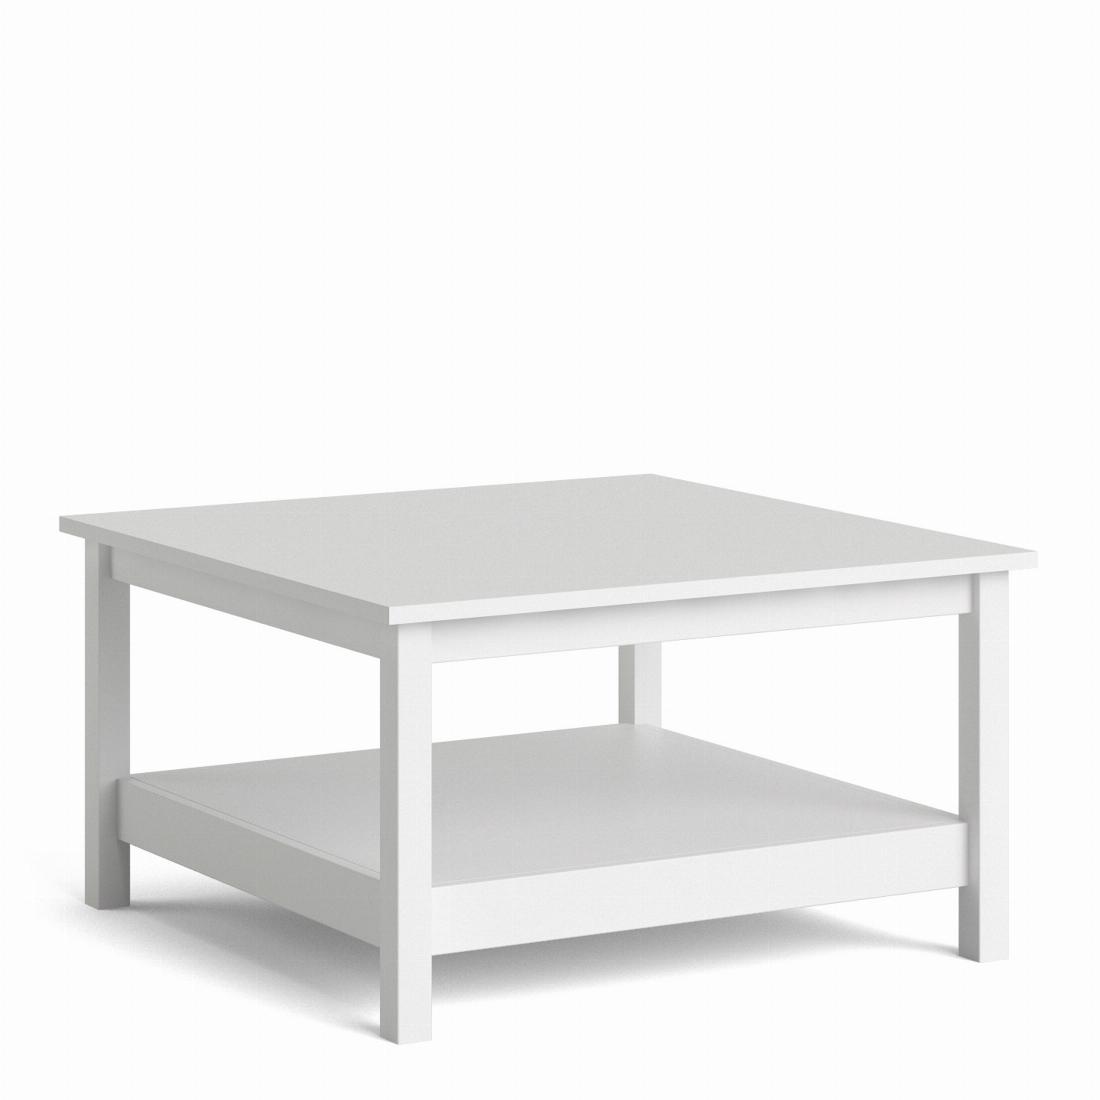 Barcelona Coffee table in White